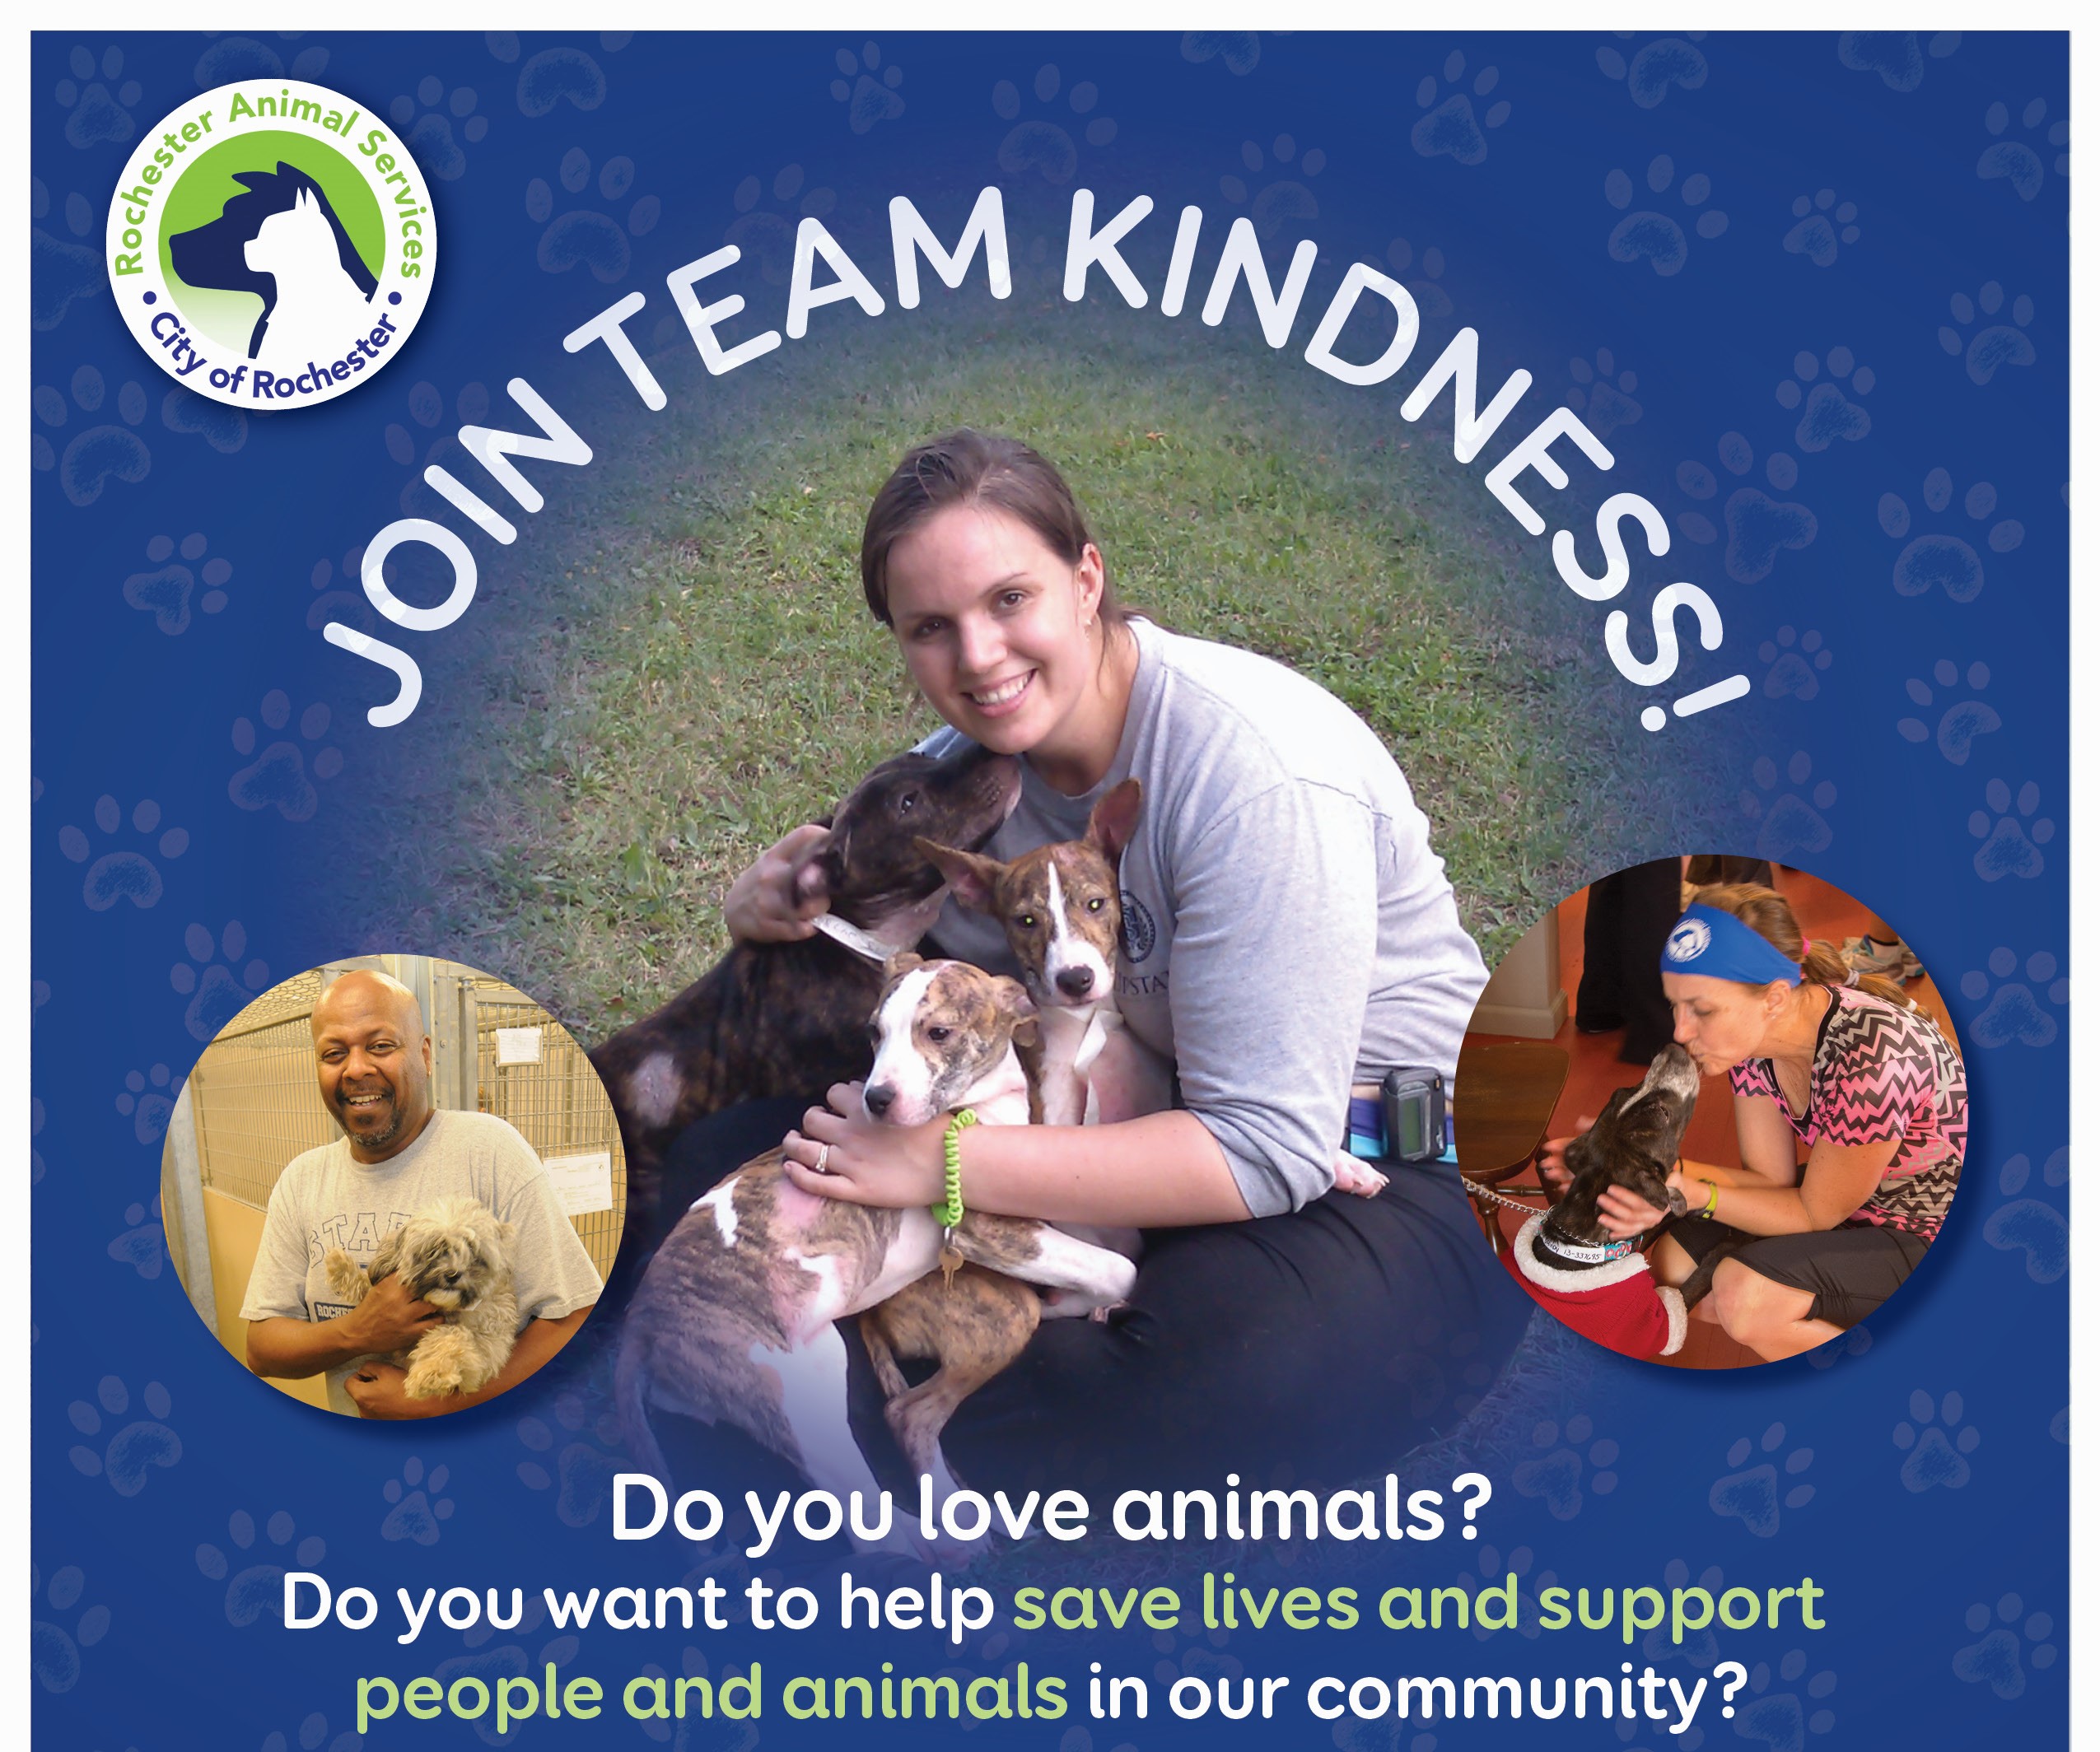 City of Rochester | Volunteer for Animal Services